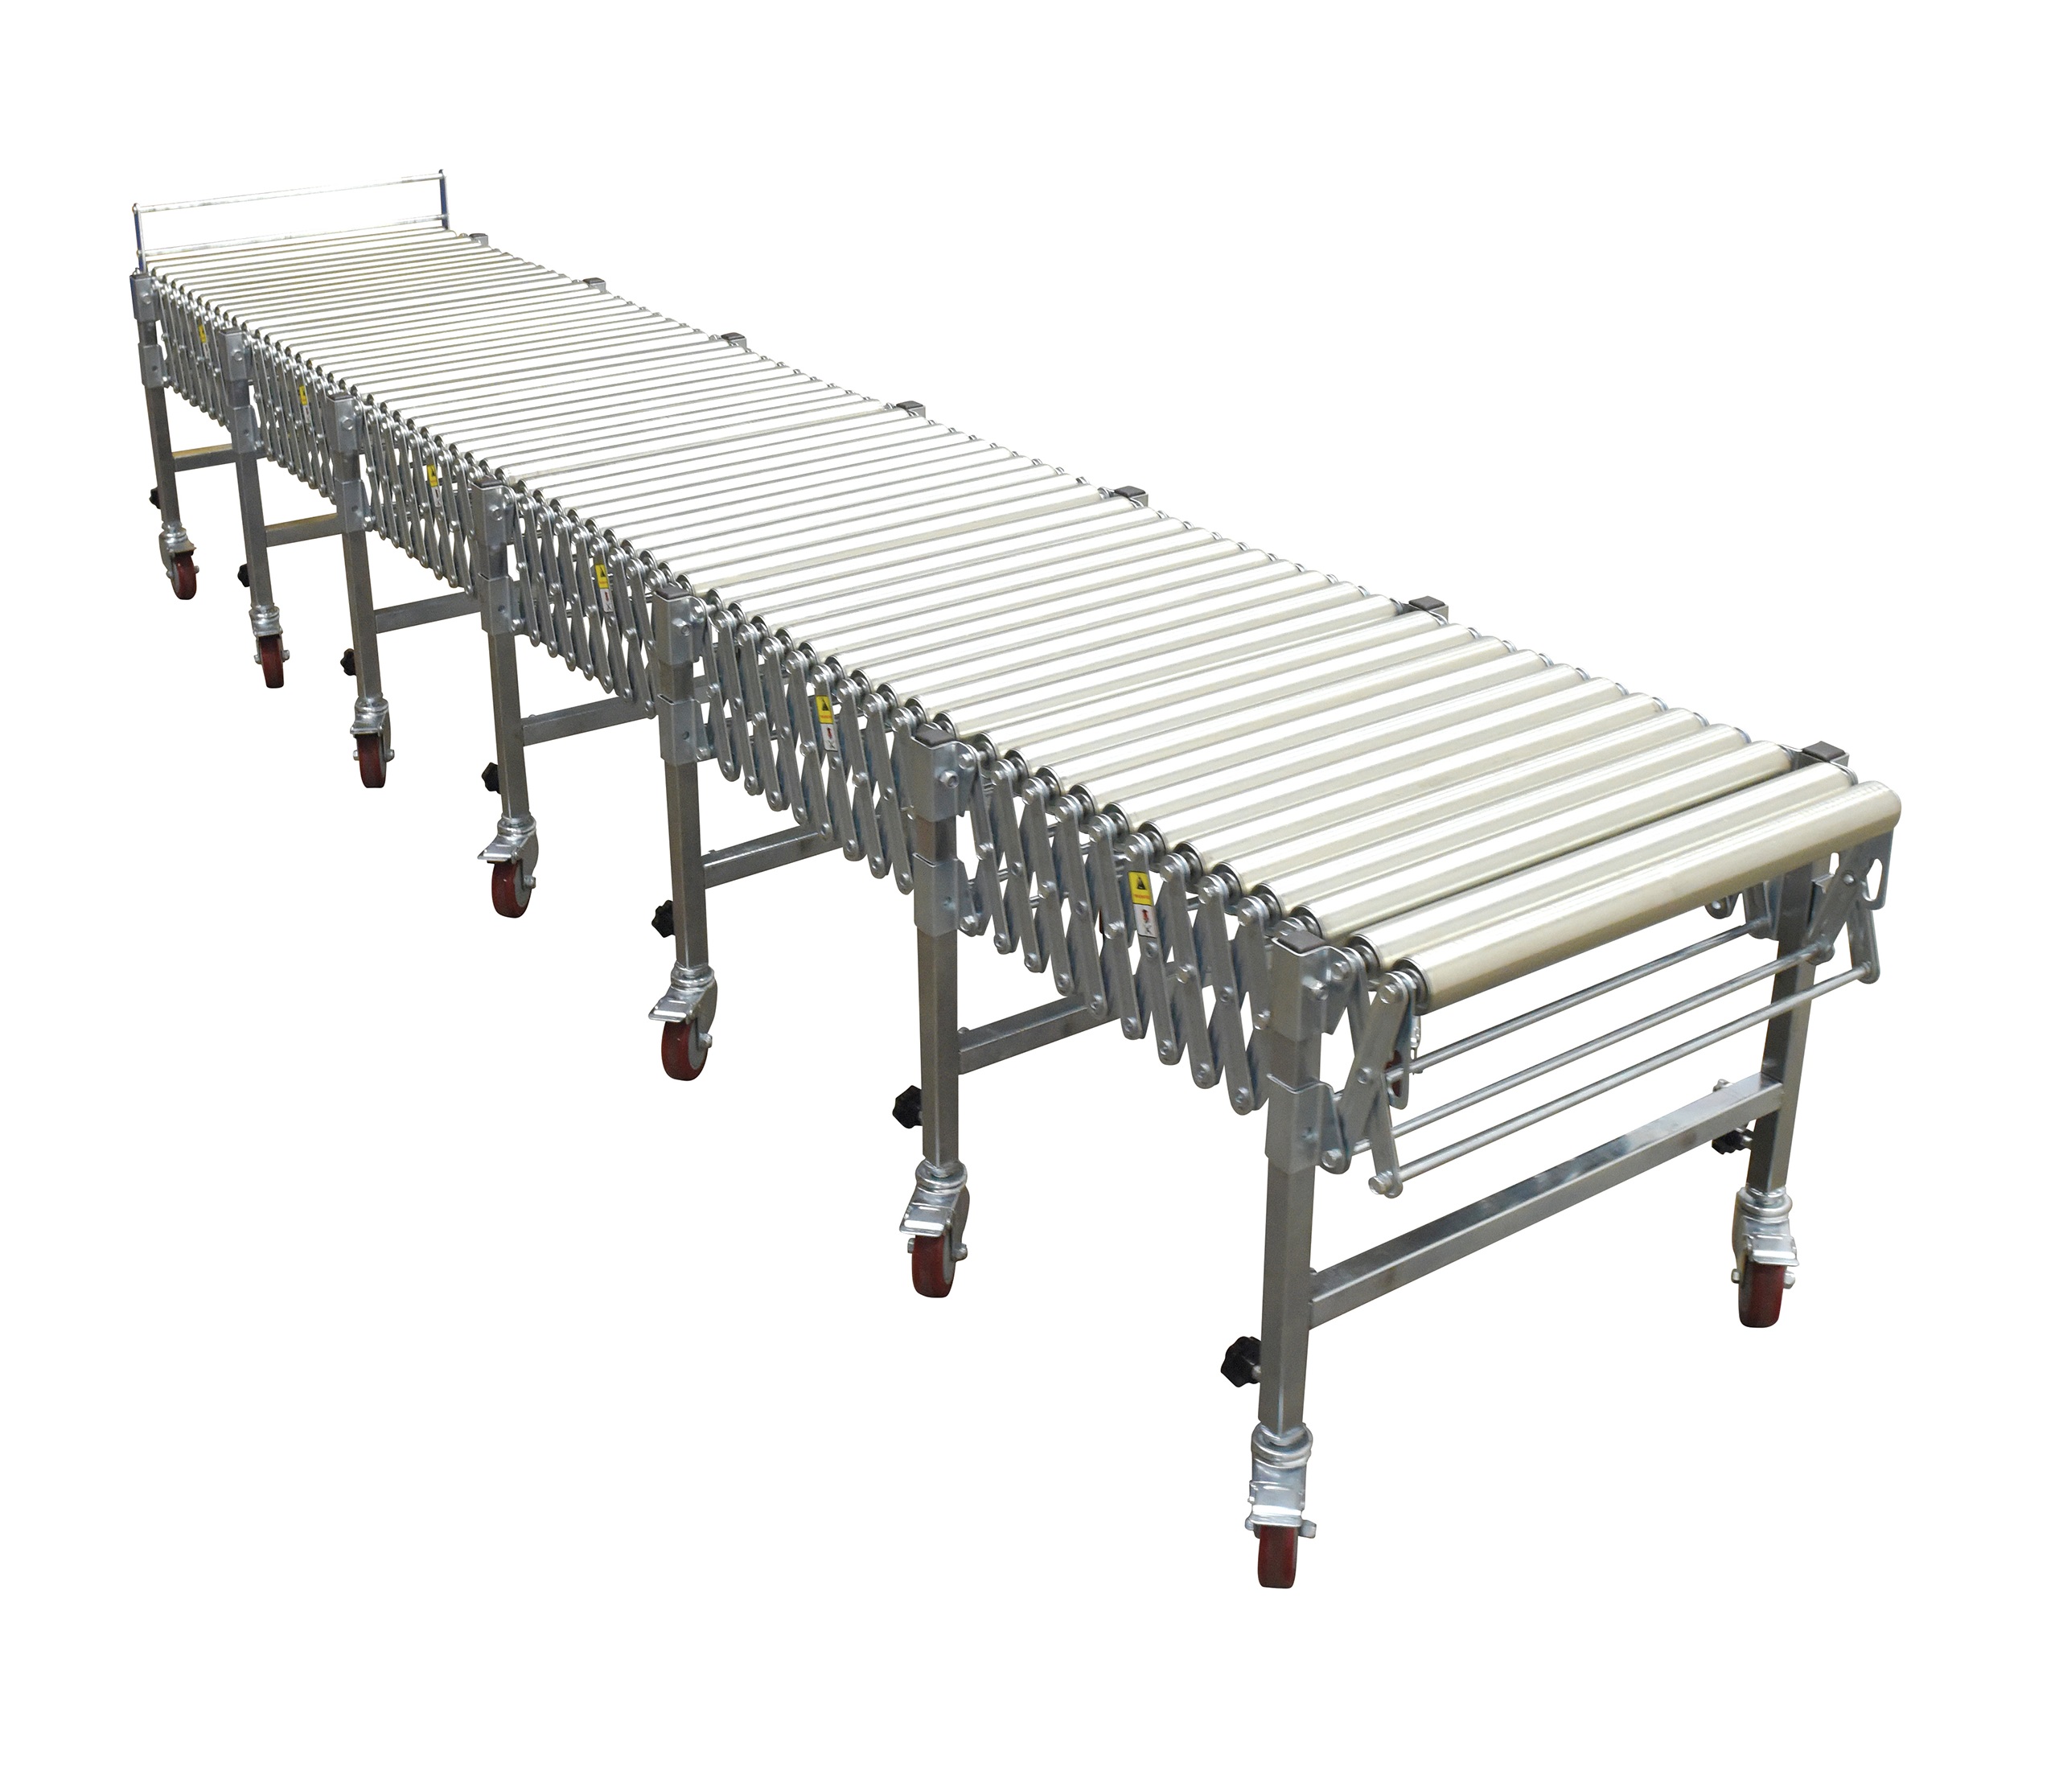 Expandable Conveyors: Accordion Roller & Skate Wheel